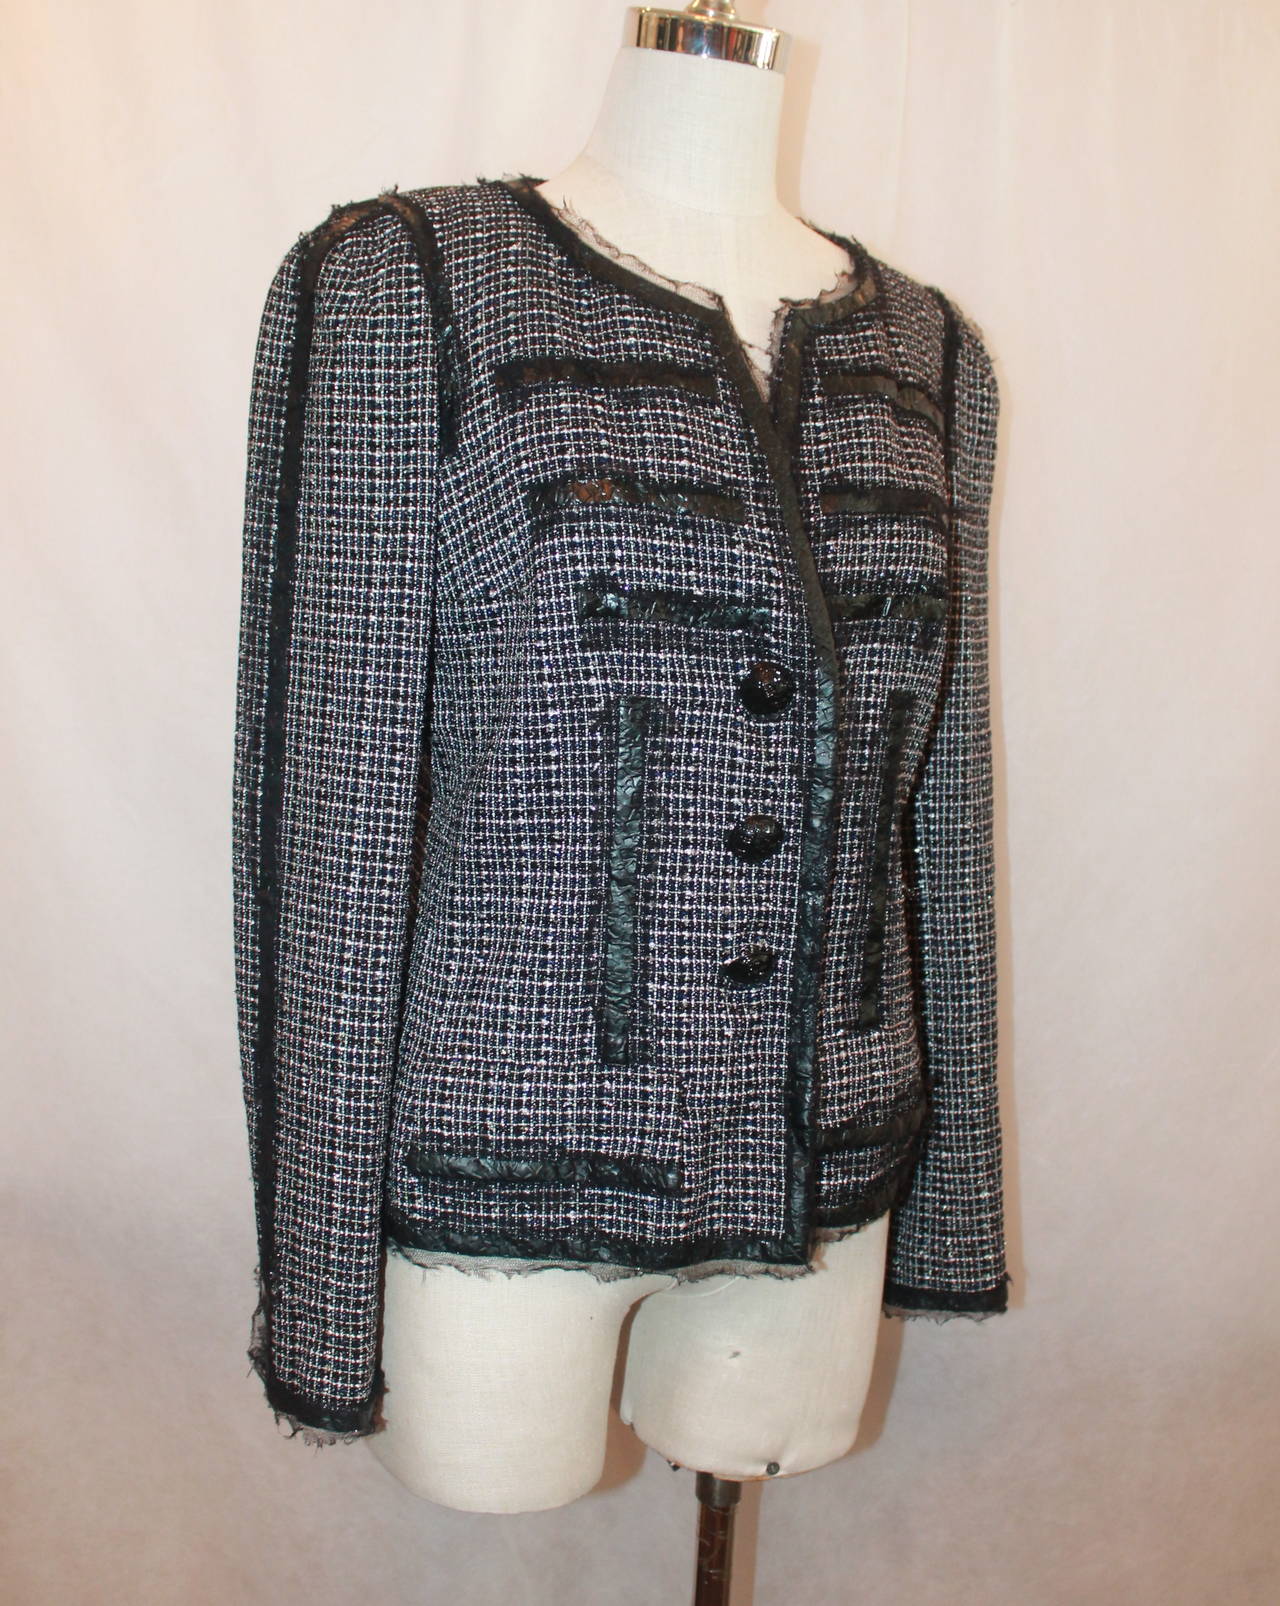 Chanel 2009 Black, White, Pink Tweed Jacket with Patent Detail - 40. This jacket is in excellent condition and is 89% nylon, 7% polyester, and 4% cotton. The tweed is a mixture of  navy, pale pink, black, white, and metallic fabric as seen on image